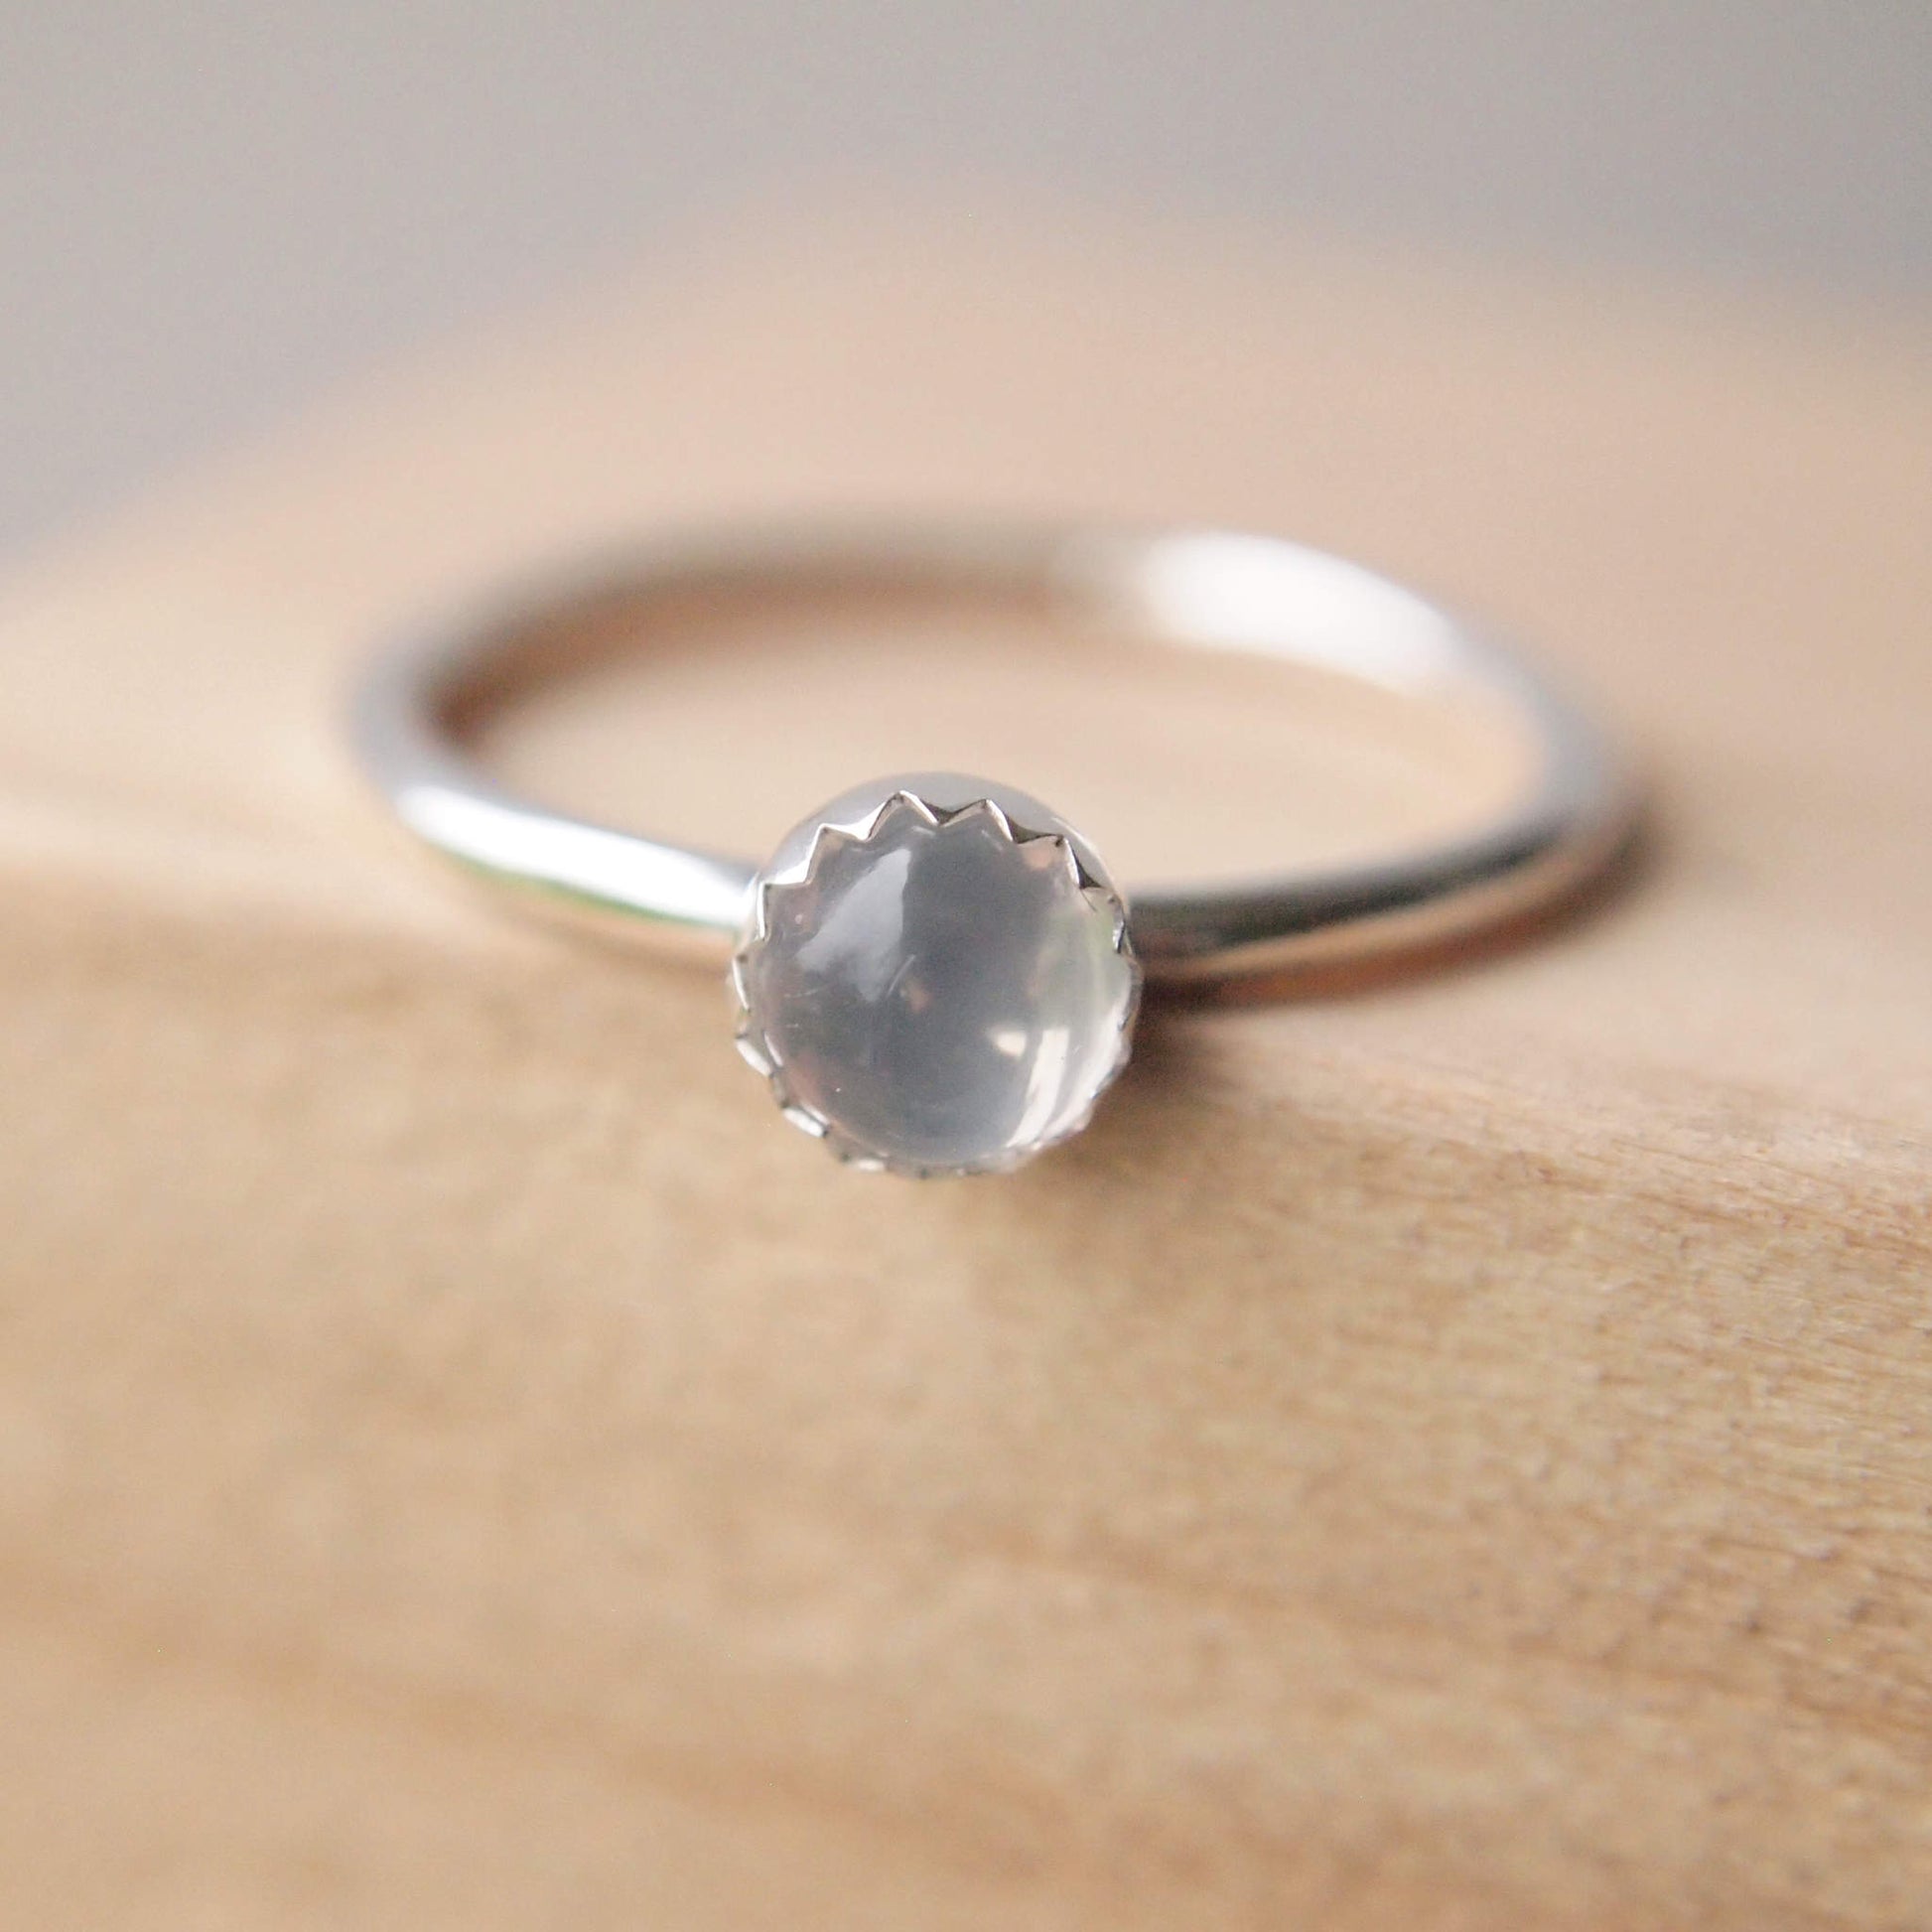 Sterling silver and moonstone cabochon ring. 5 mm sized milky white cabochon stone on a fully round band of sterling silver with a zig zag edge where the stone meets the band. Handmade in Scotland by maram jewellery